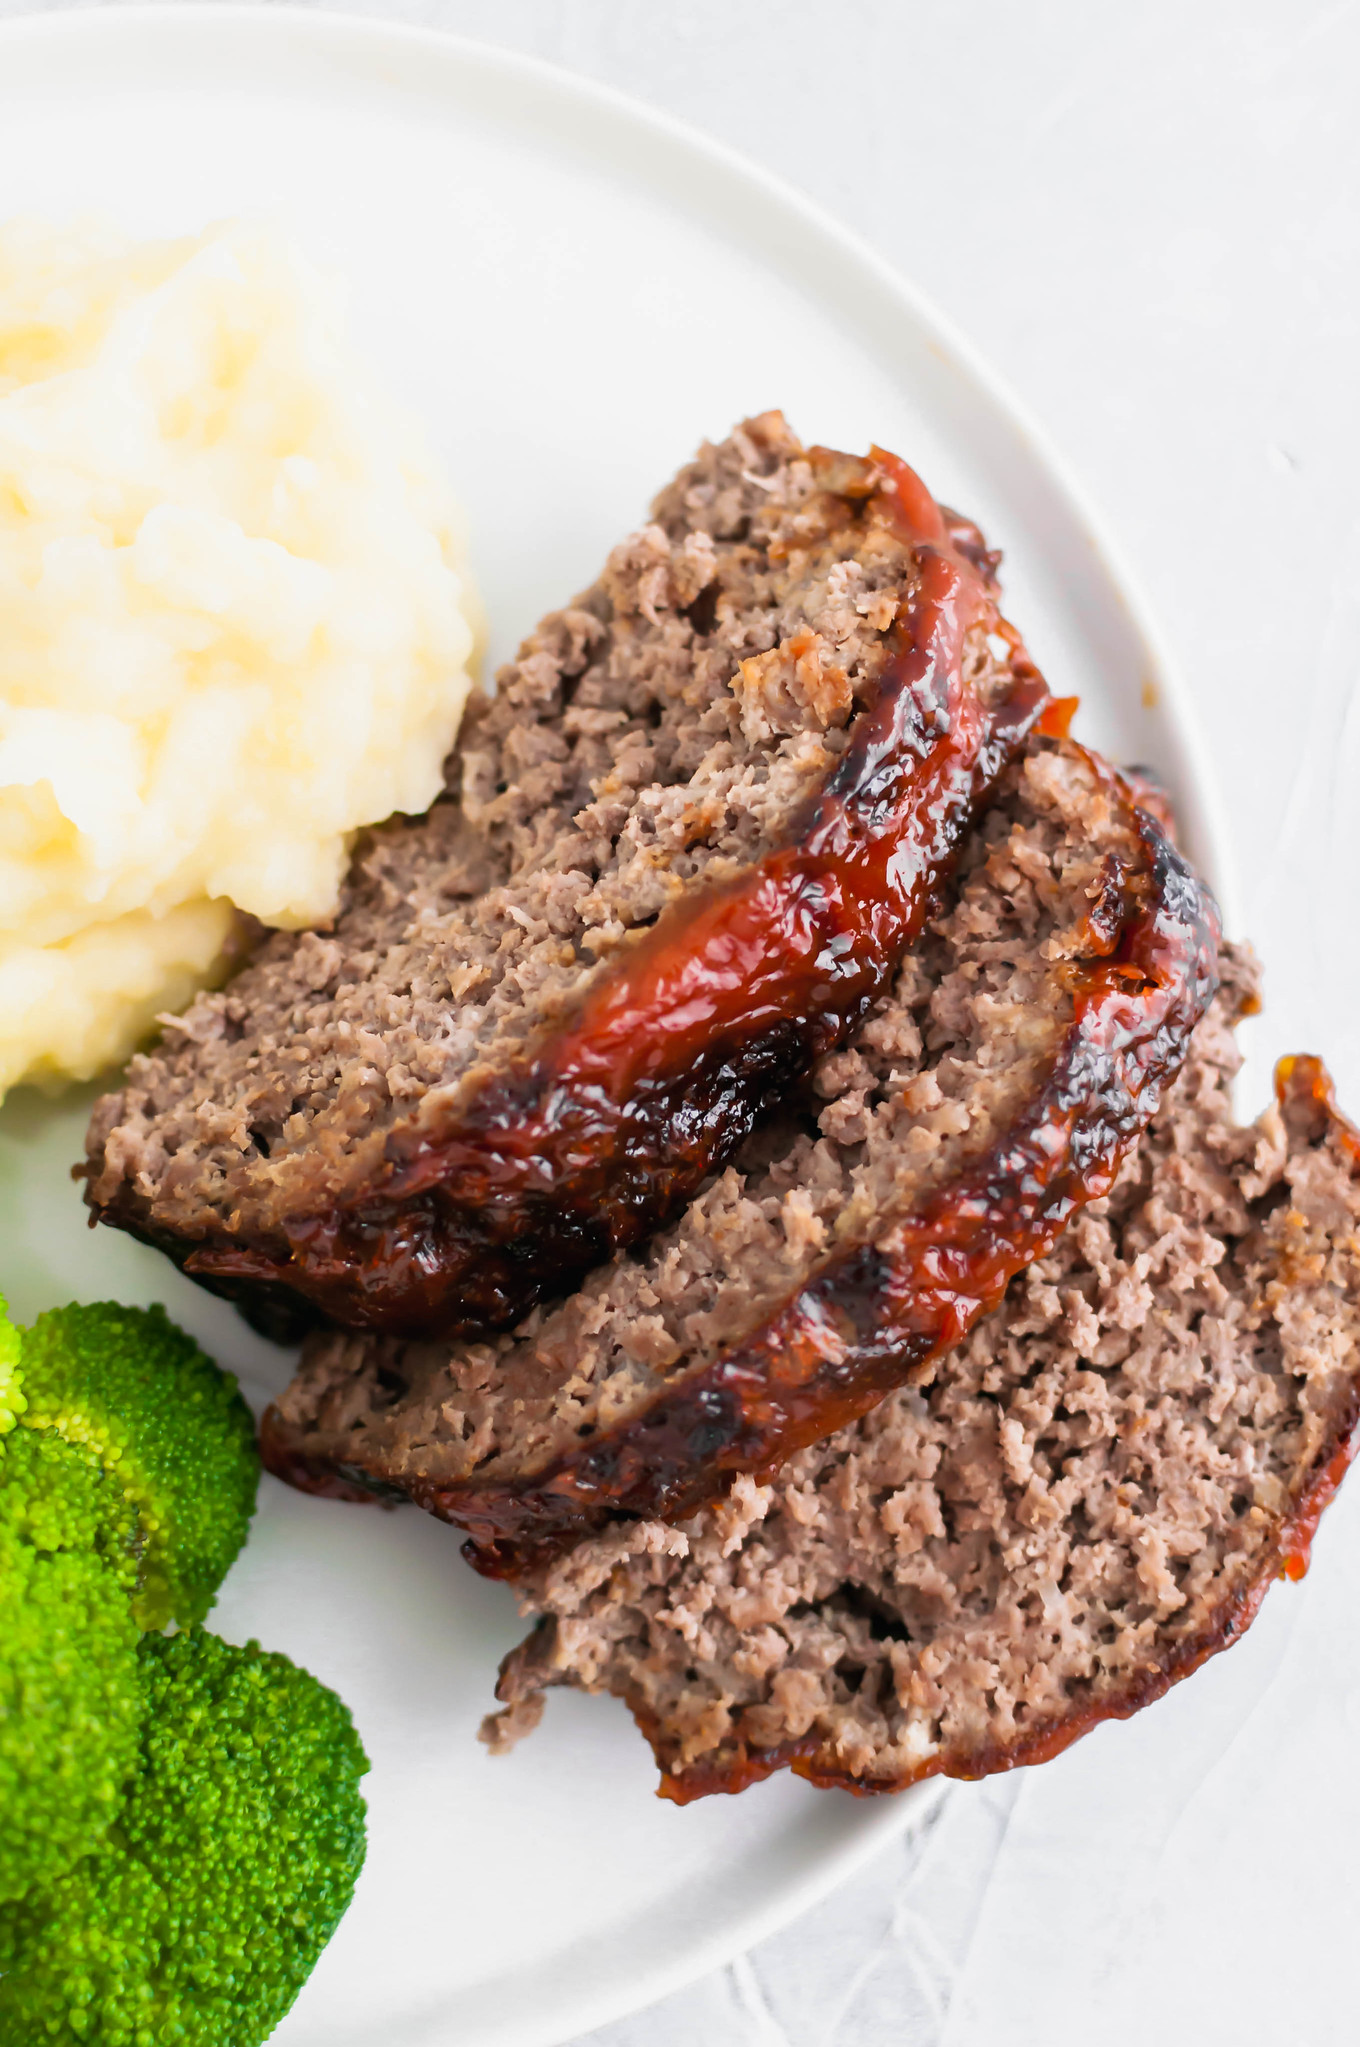 Crispy on the outside and juicy on the inside, this Air Fryer Meatloaf is simple and quick enough for a weeknight meal. Slathered with a delicious glaze to put it over the top.